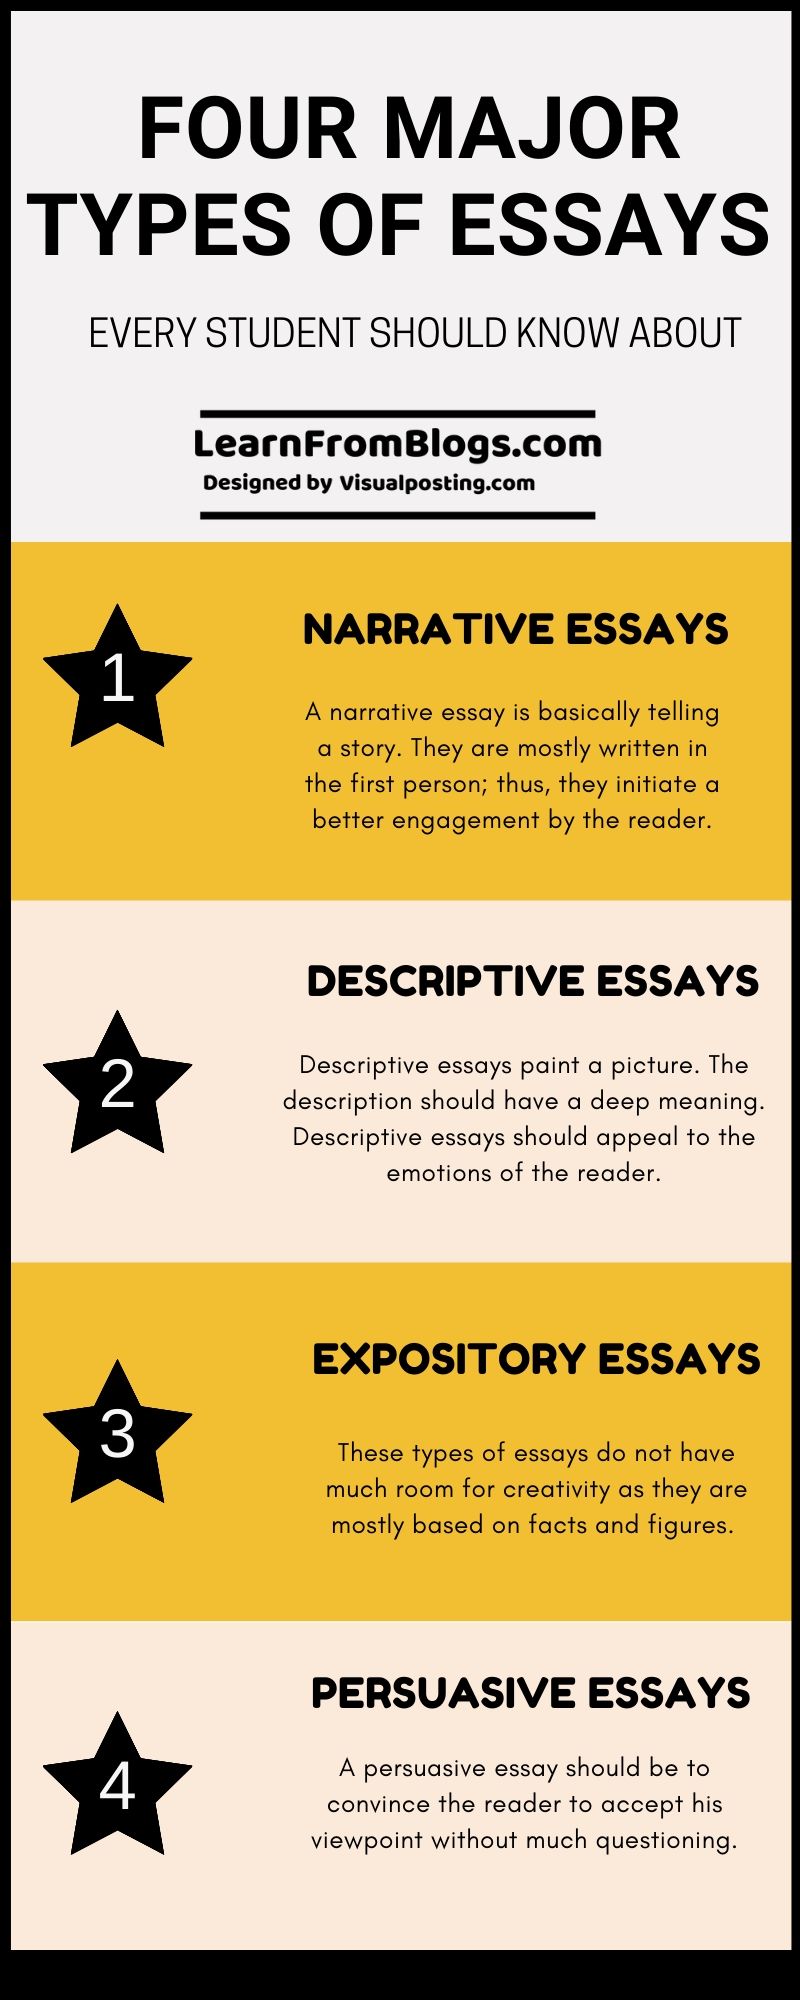 specific types of essay